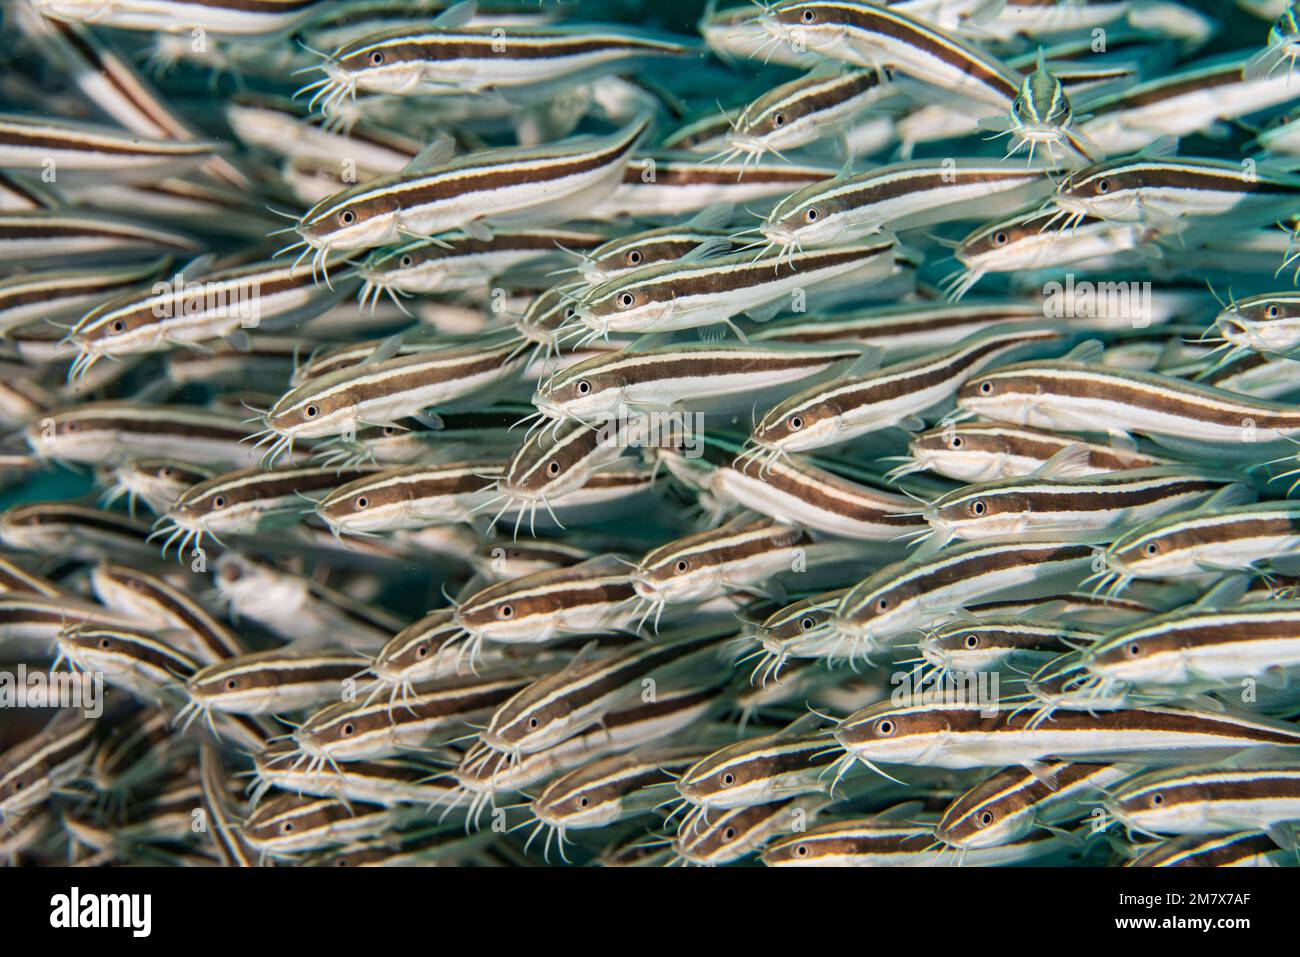 Catfish up close. Mozambique: THESE INCREDIBLE images show off a school of catfish forming a wall along the seafloor, like a cloud of fish. One image Stock Photo